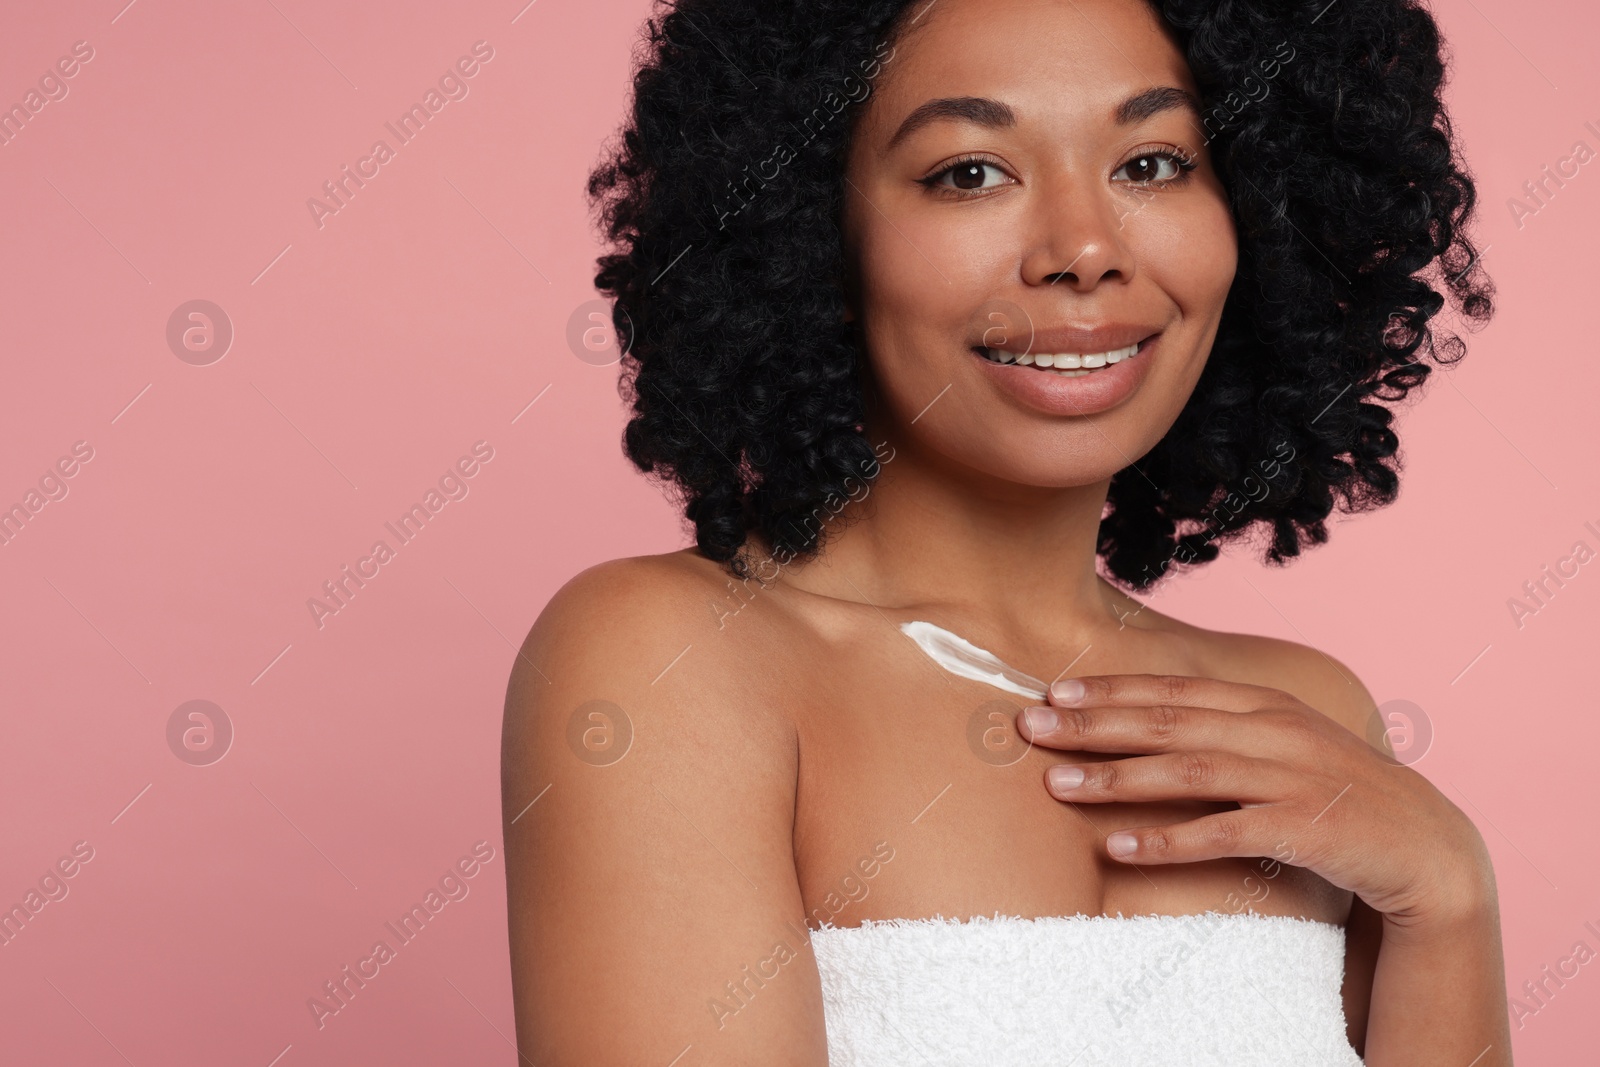 Photo of Young woman applying cream onto body on pink background. Space for text